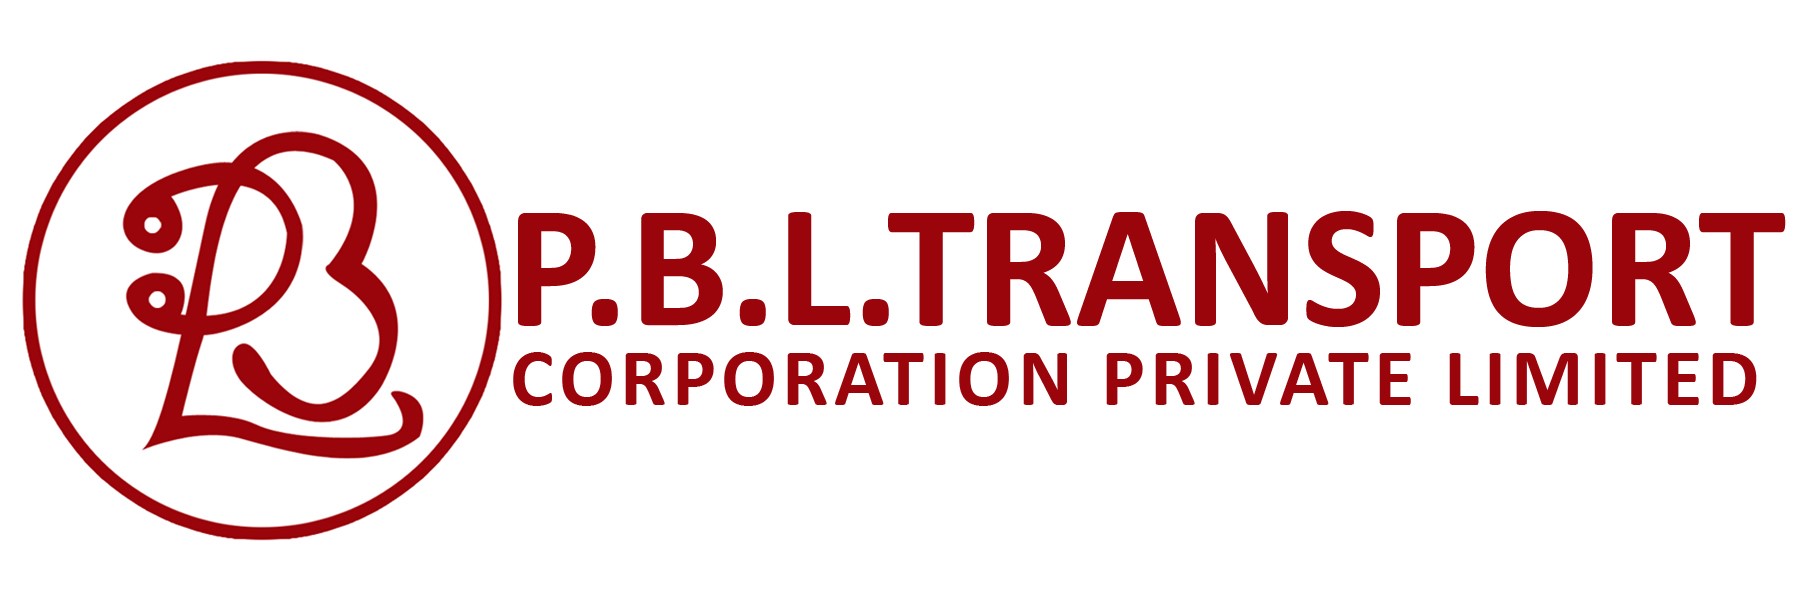 PBL Transport Corporation Private Limited